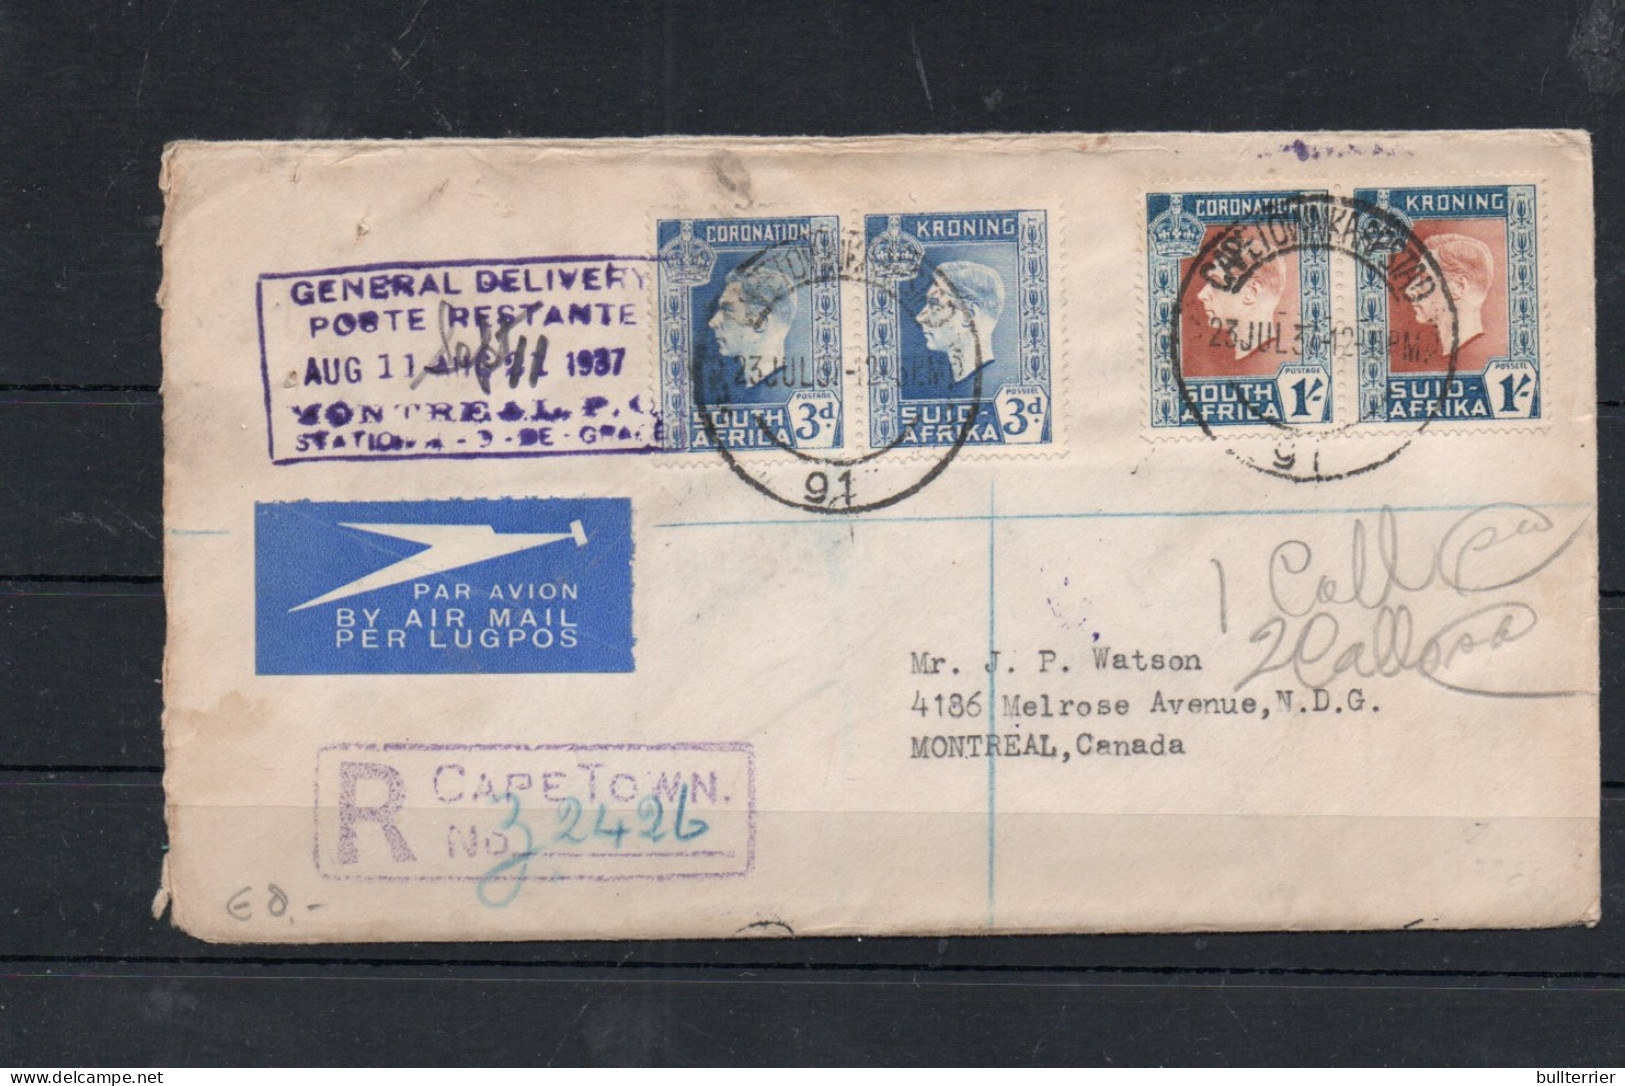 SOUTH AFRICA - 1937 - REG AIRMAIL COVER  CAPETOWN TO MONTREAL CANADA  WITH BACKSTAMPS - Unclassified